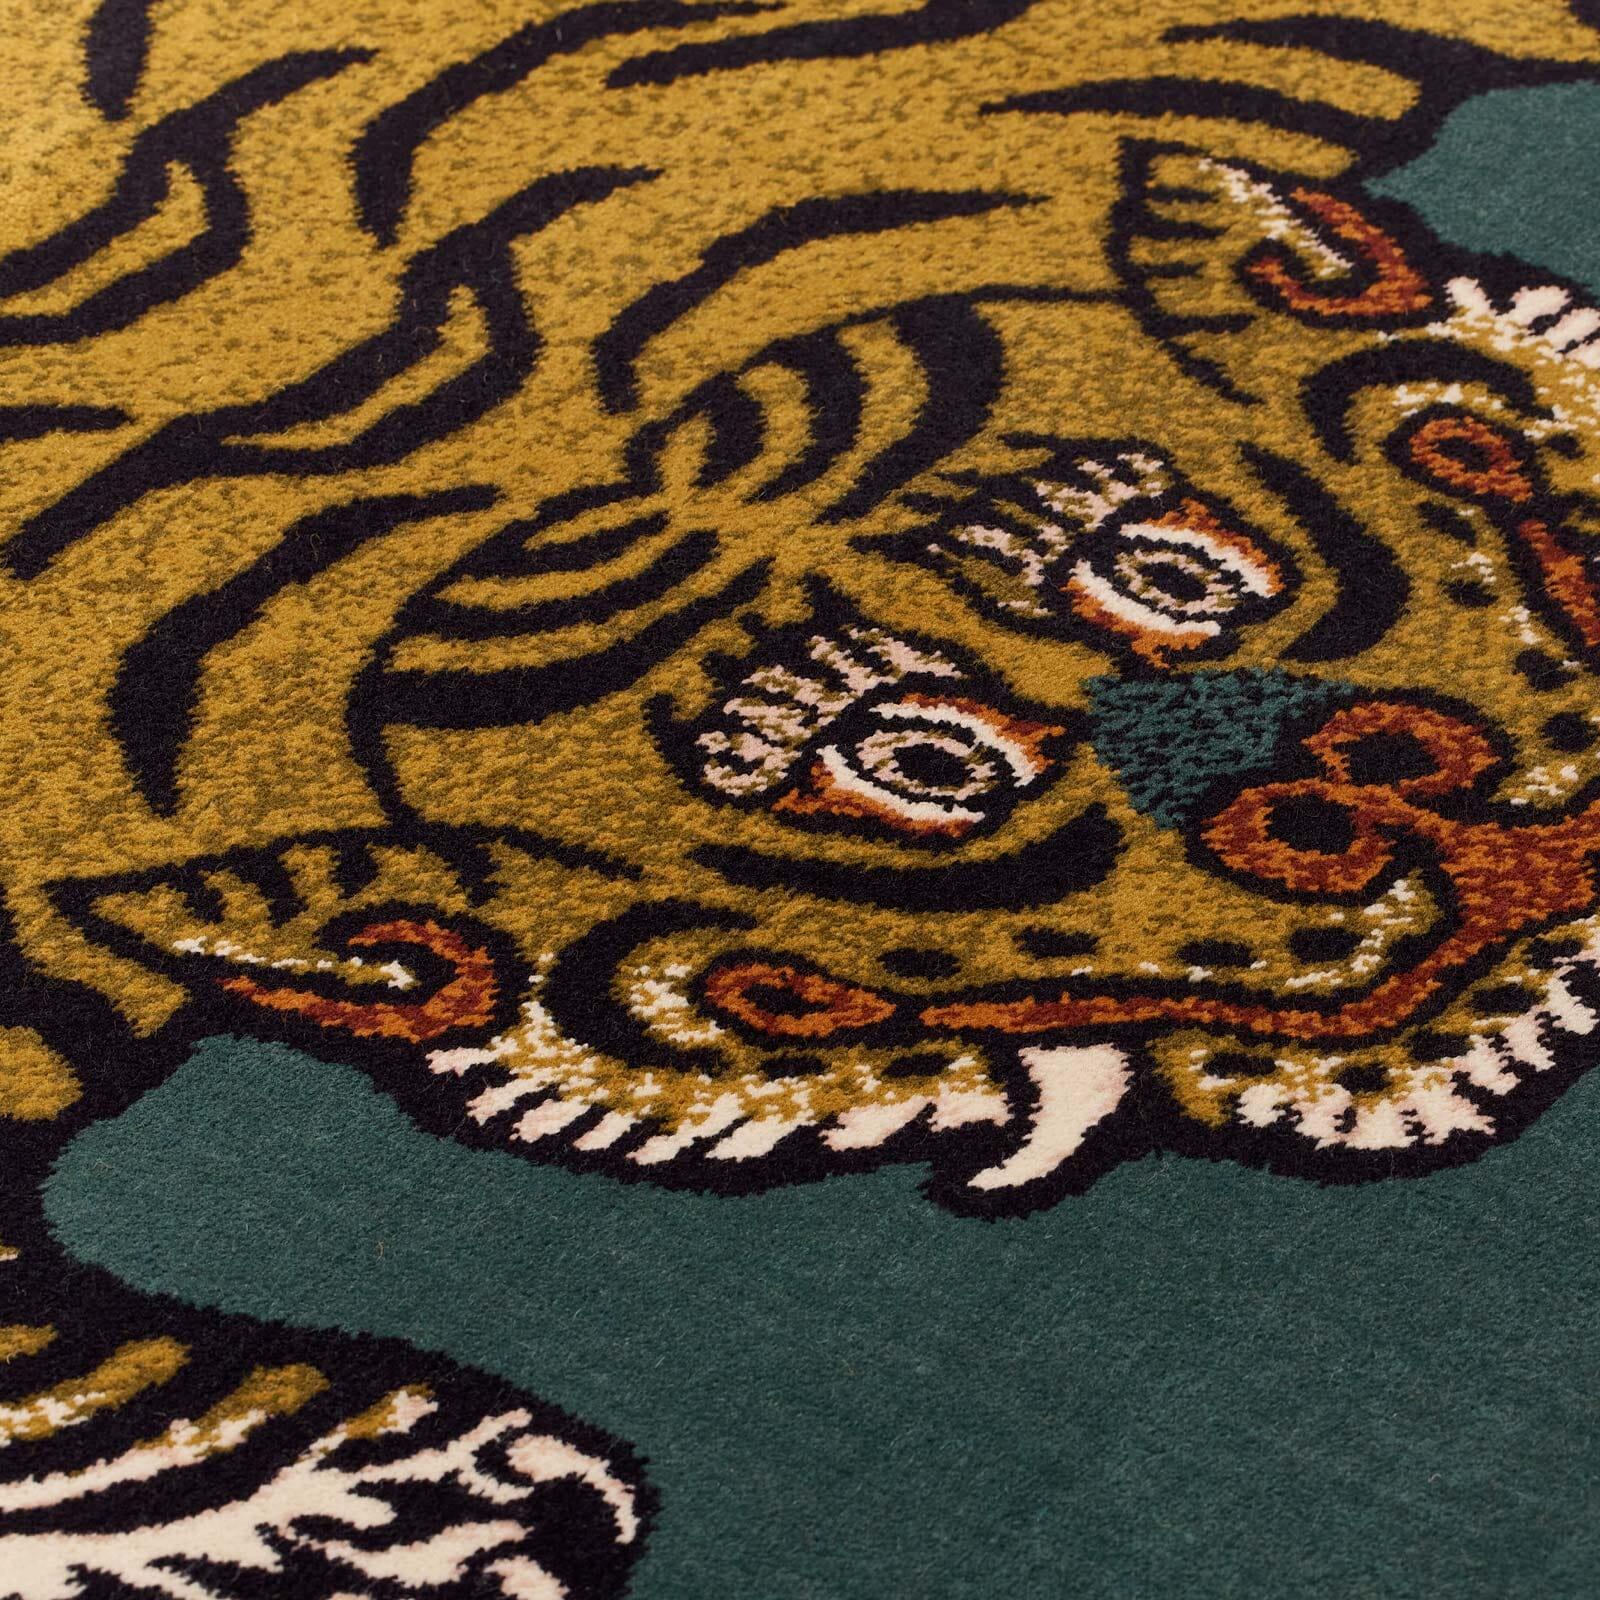 You can't help but notice an Axminster rug just like you wouldn't be able to miss a tiger in the room. Crafted by the master weavers of Axminster Carpets at their factory in Devon, the SABER rug sees our fantastic beast (a now-iconic motif inspired